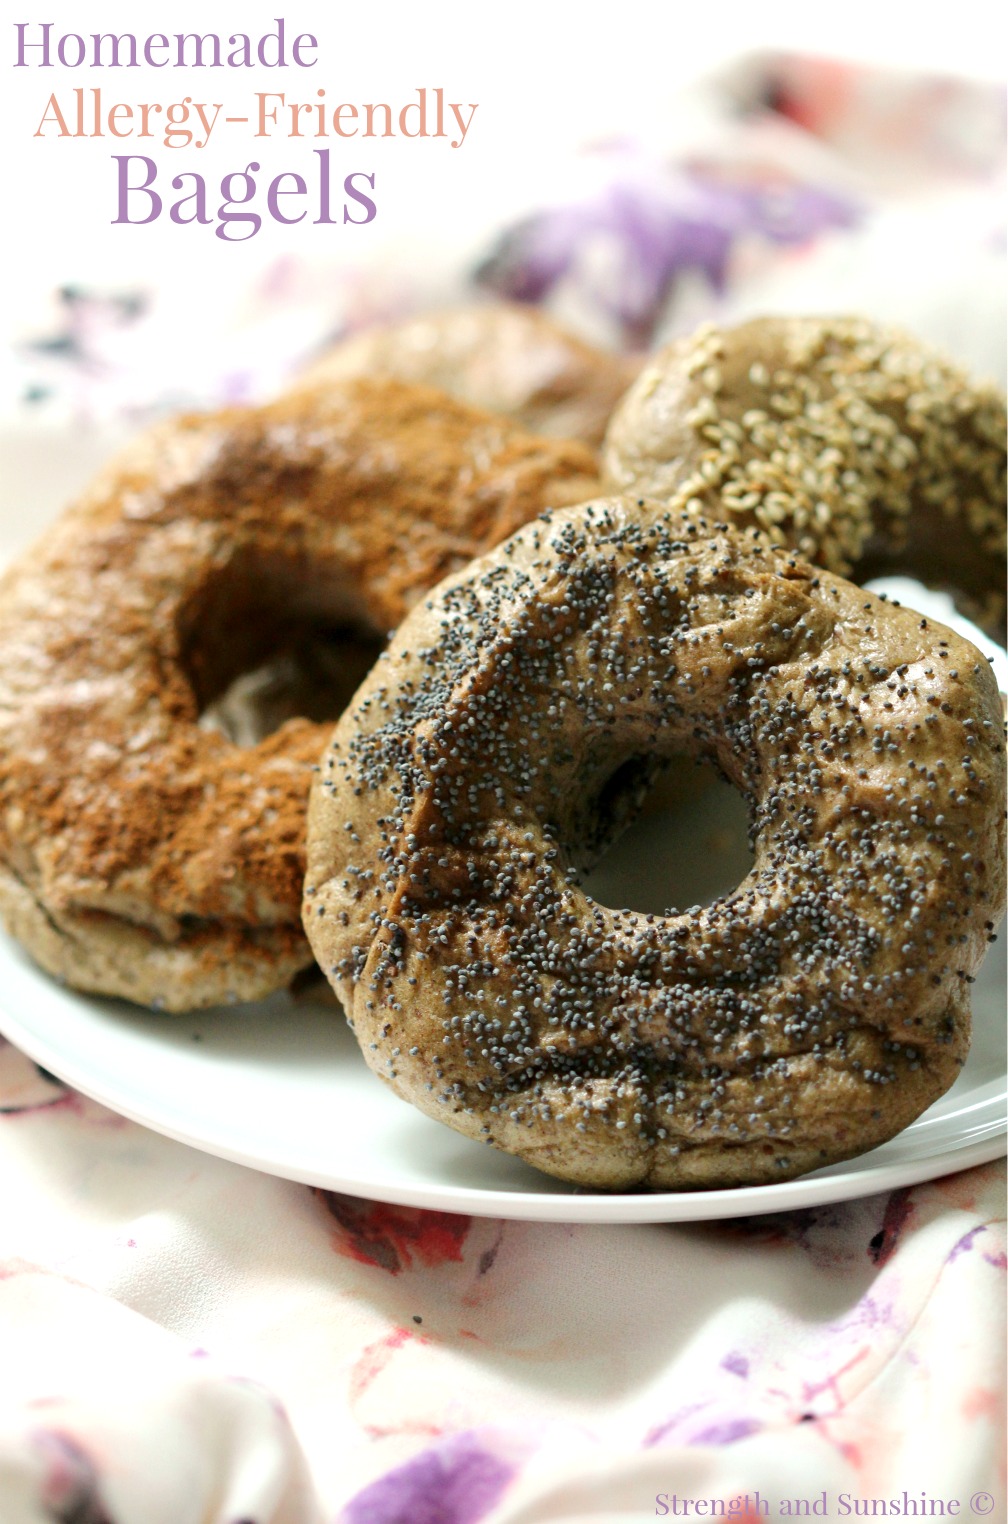 Homemade Allergy-Friendly Bagels | Strength and Sunshine @RebeccaGF666 Fresh from the oven, homemade allergy-friendly bagels for everyone! Gluten-free, nut-free, dairy-free, egg-free, soy-free, vegan, a simple recipe for the classic and favorite breakfast carb! Choose your topping and flavors for a special journey!